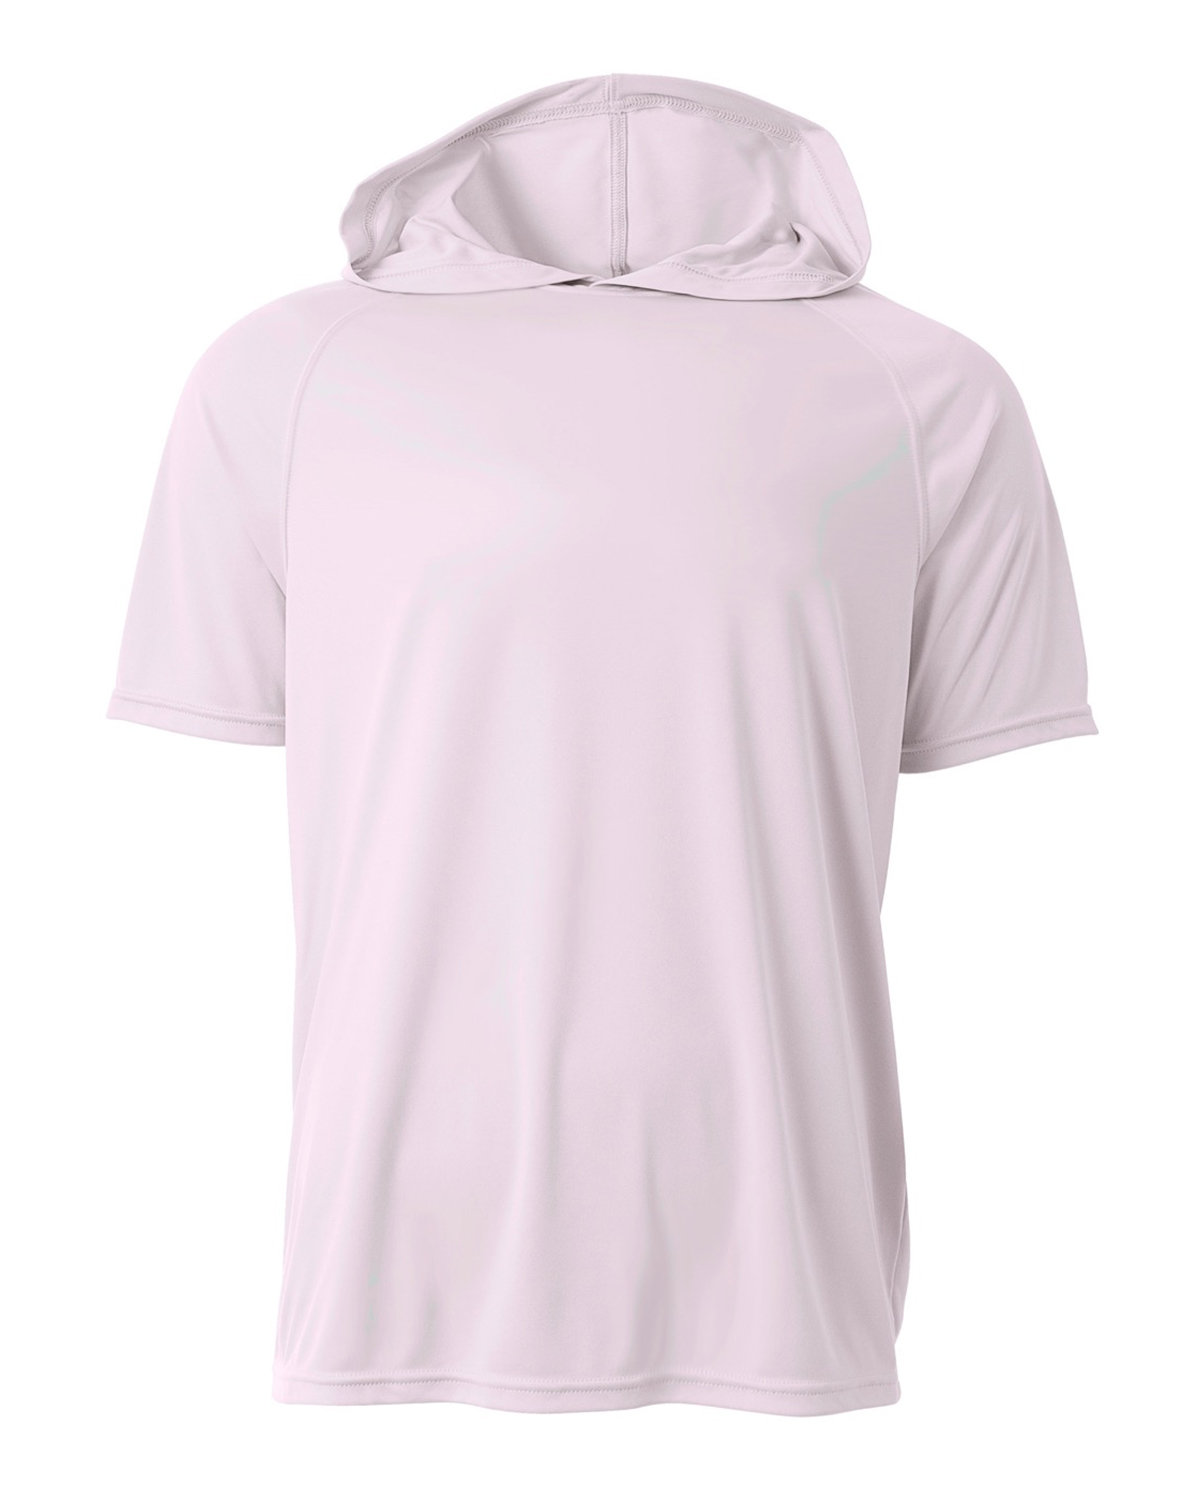 Mens Cooling Performance Hooded T-Shirt-A4